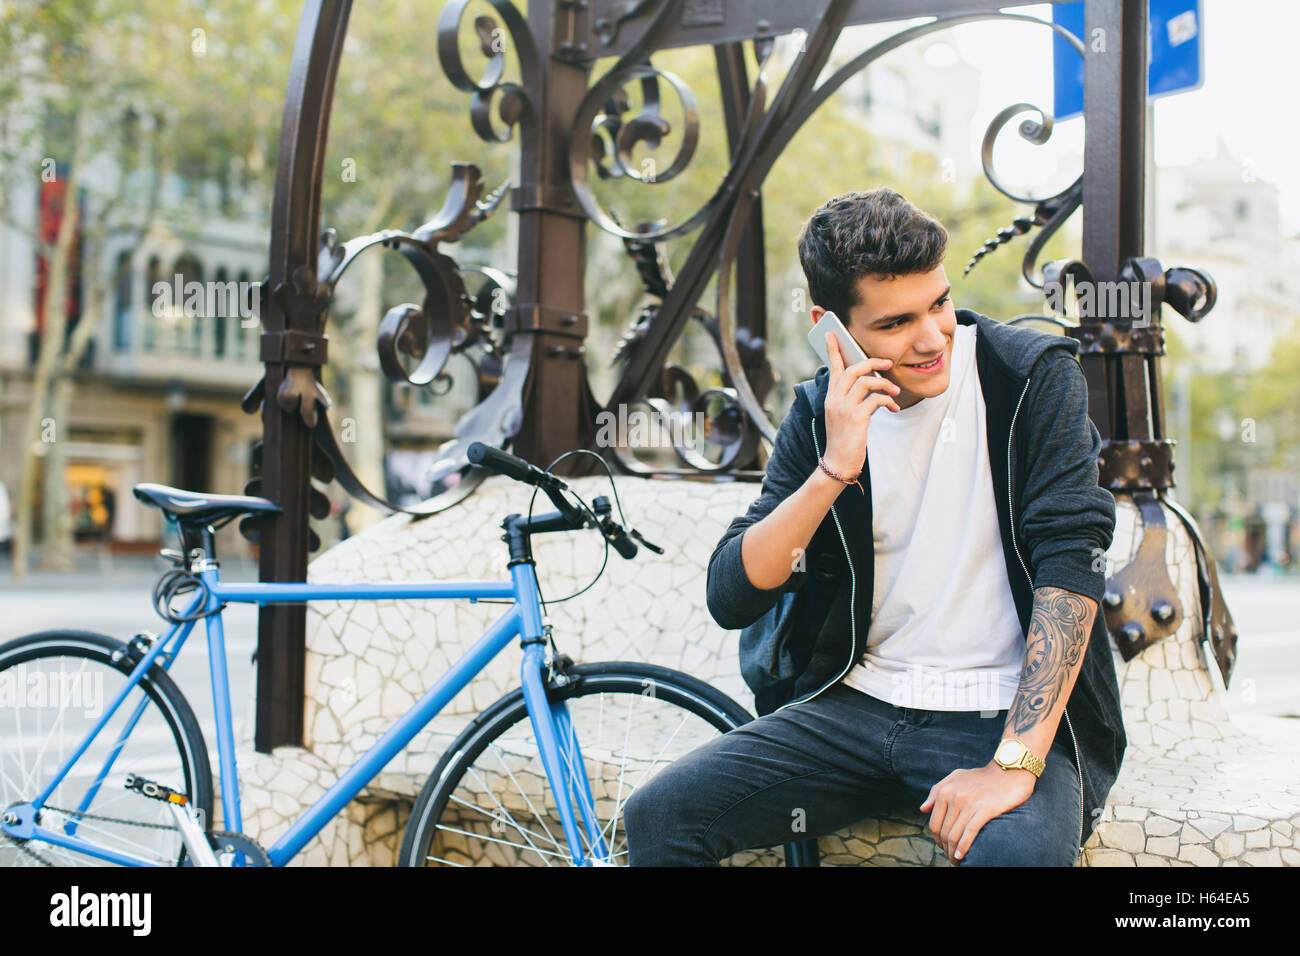 Teenager with a bike in the city, using smartphone Stock Photo